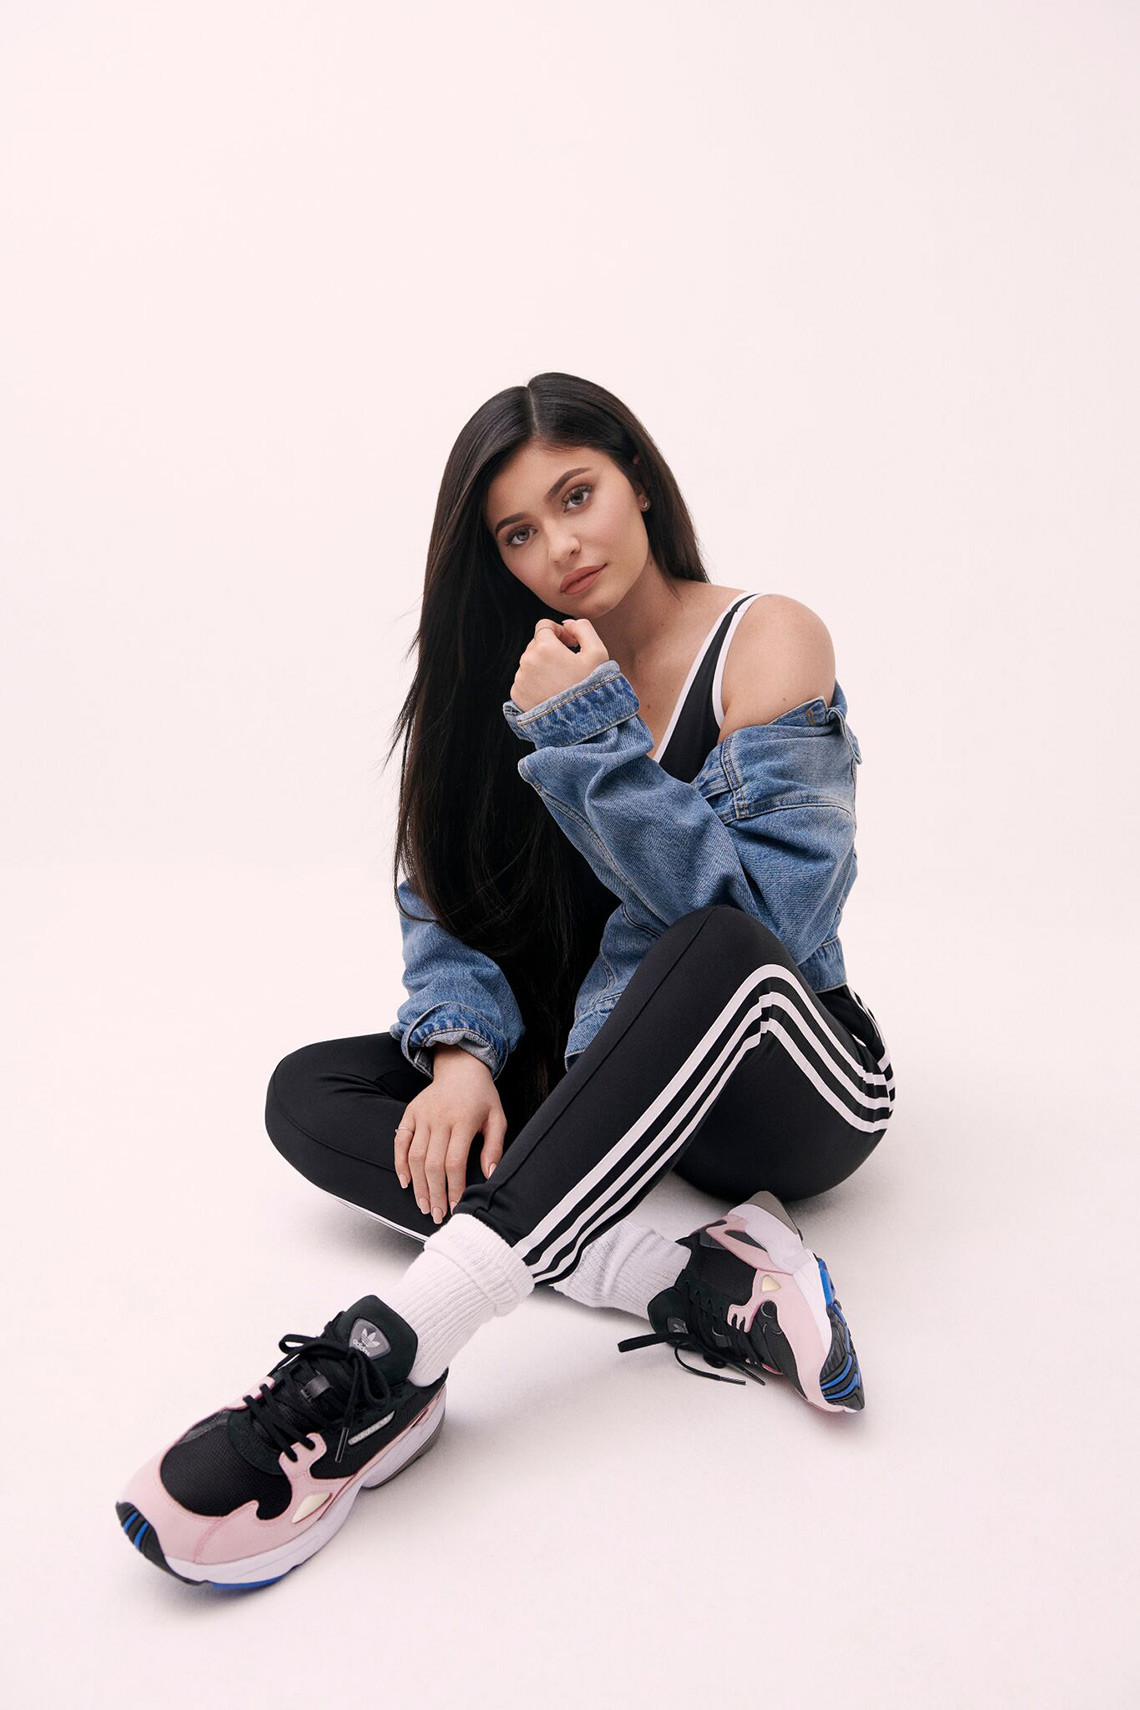 kylie jenner adidas shoes price